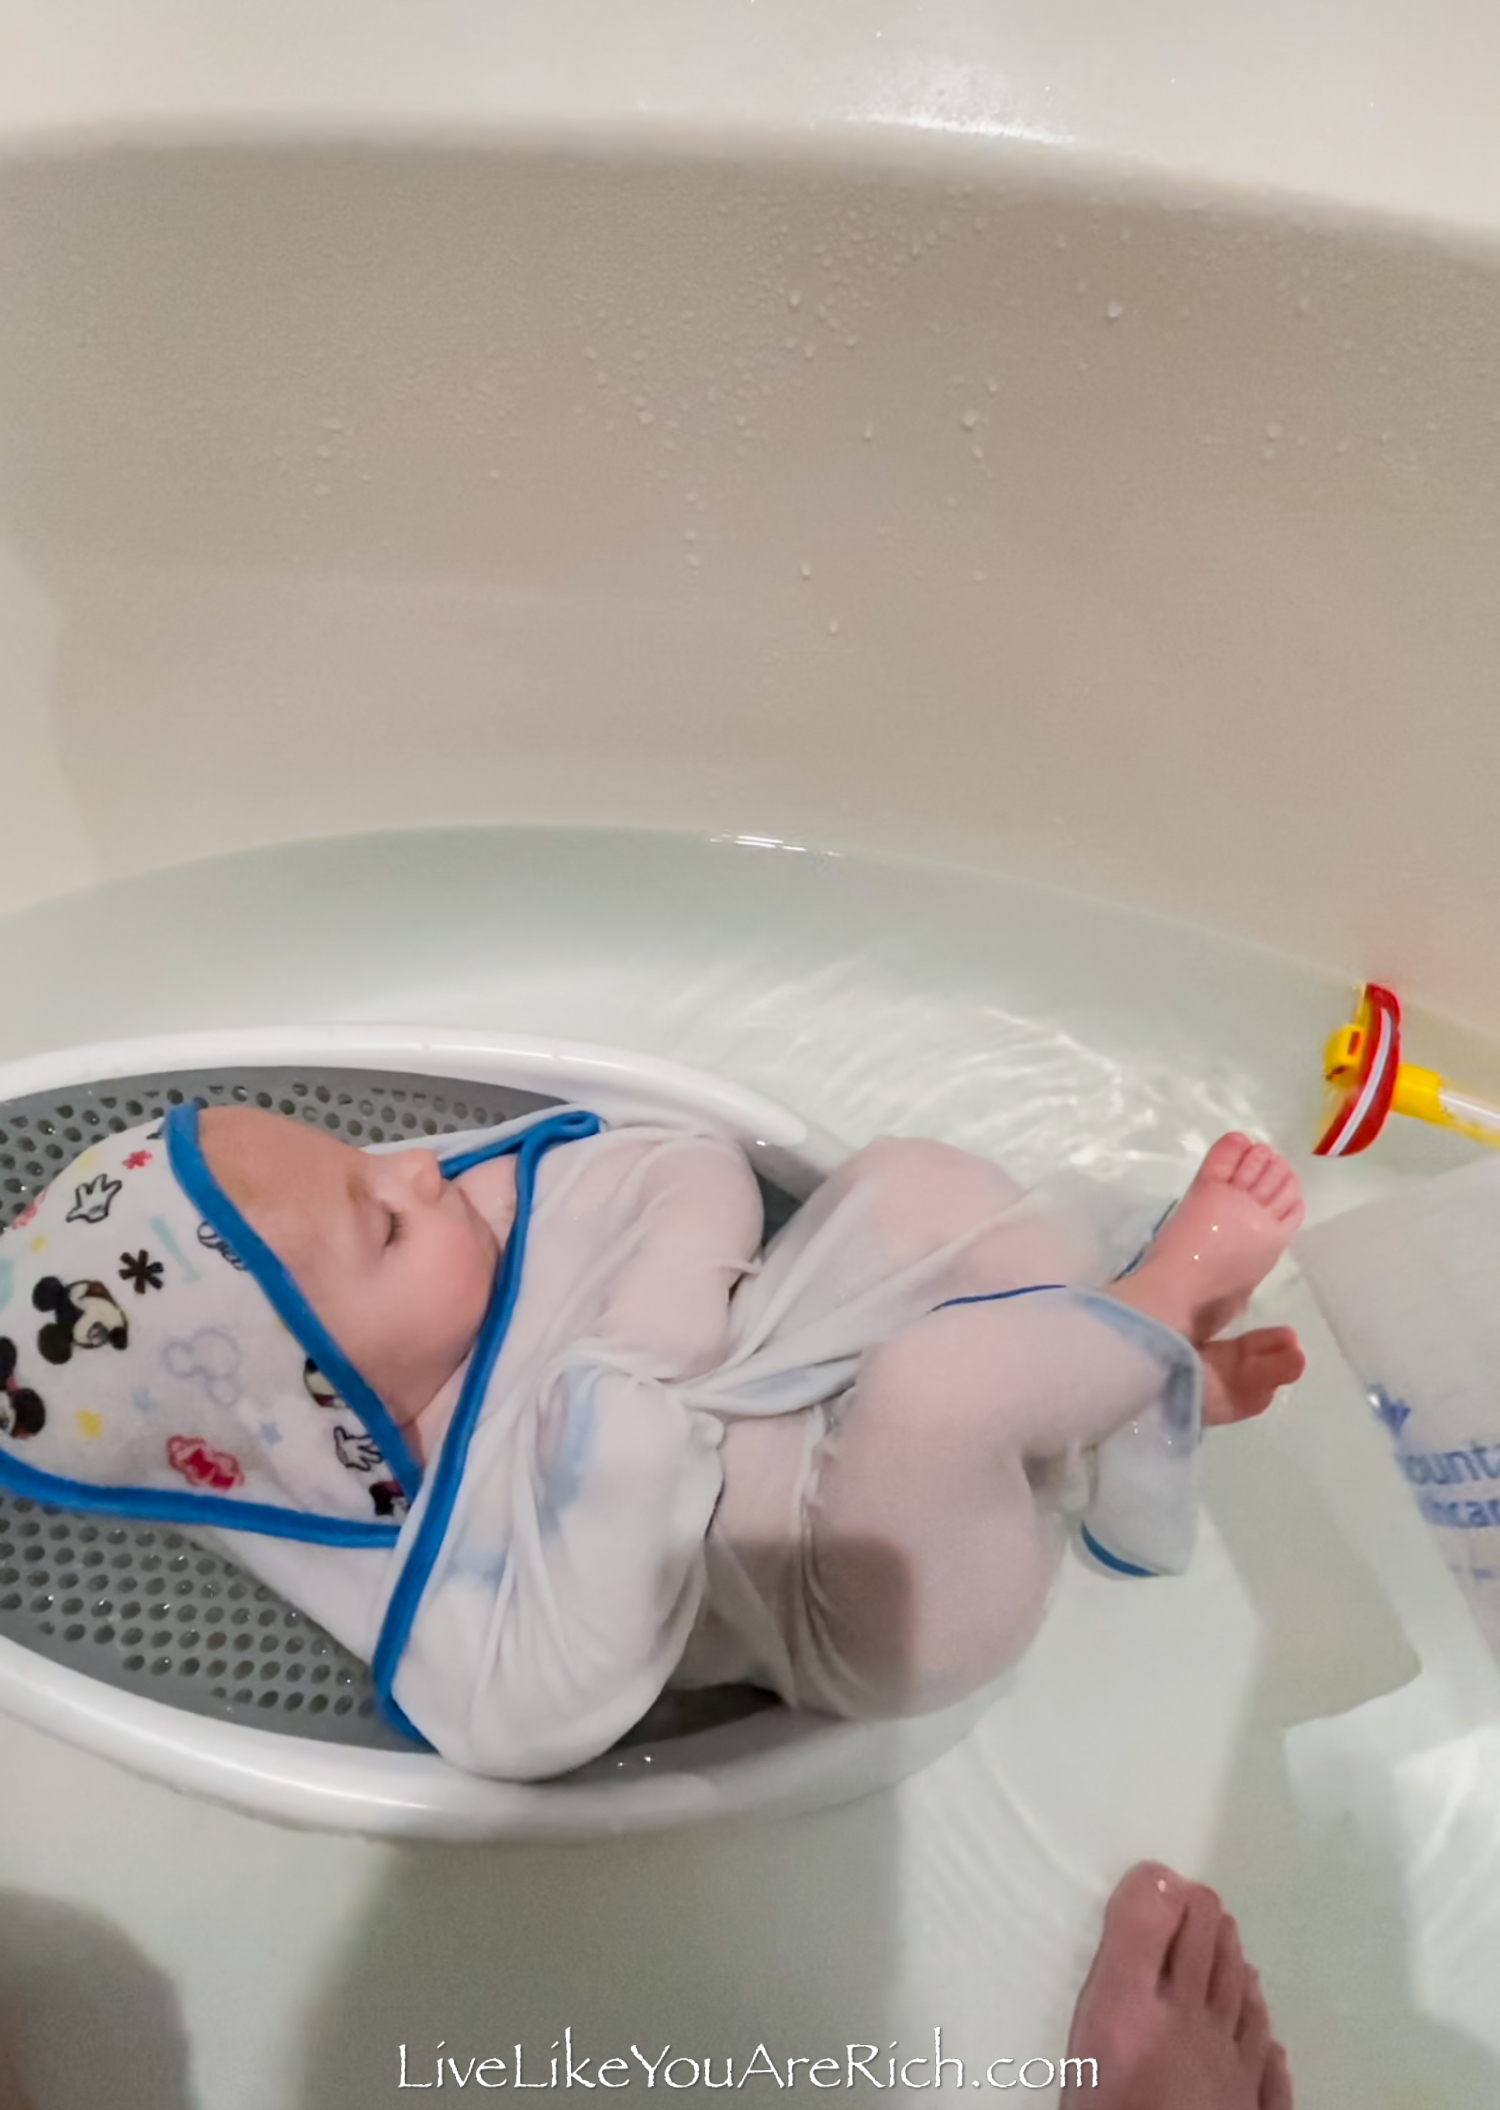 https://livelikeyouarerich.com/wp-content/uploads/2023/09/baby-in-baby-bathtub.jpg